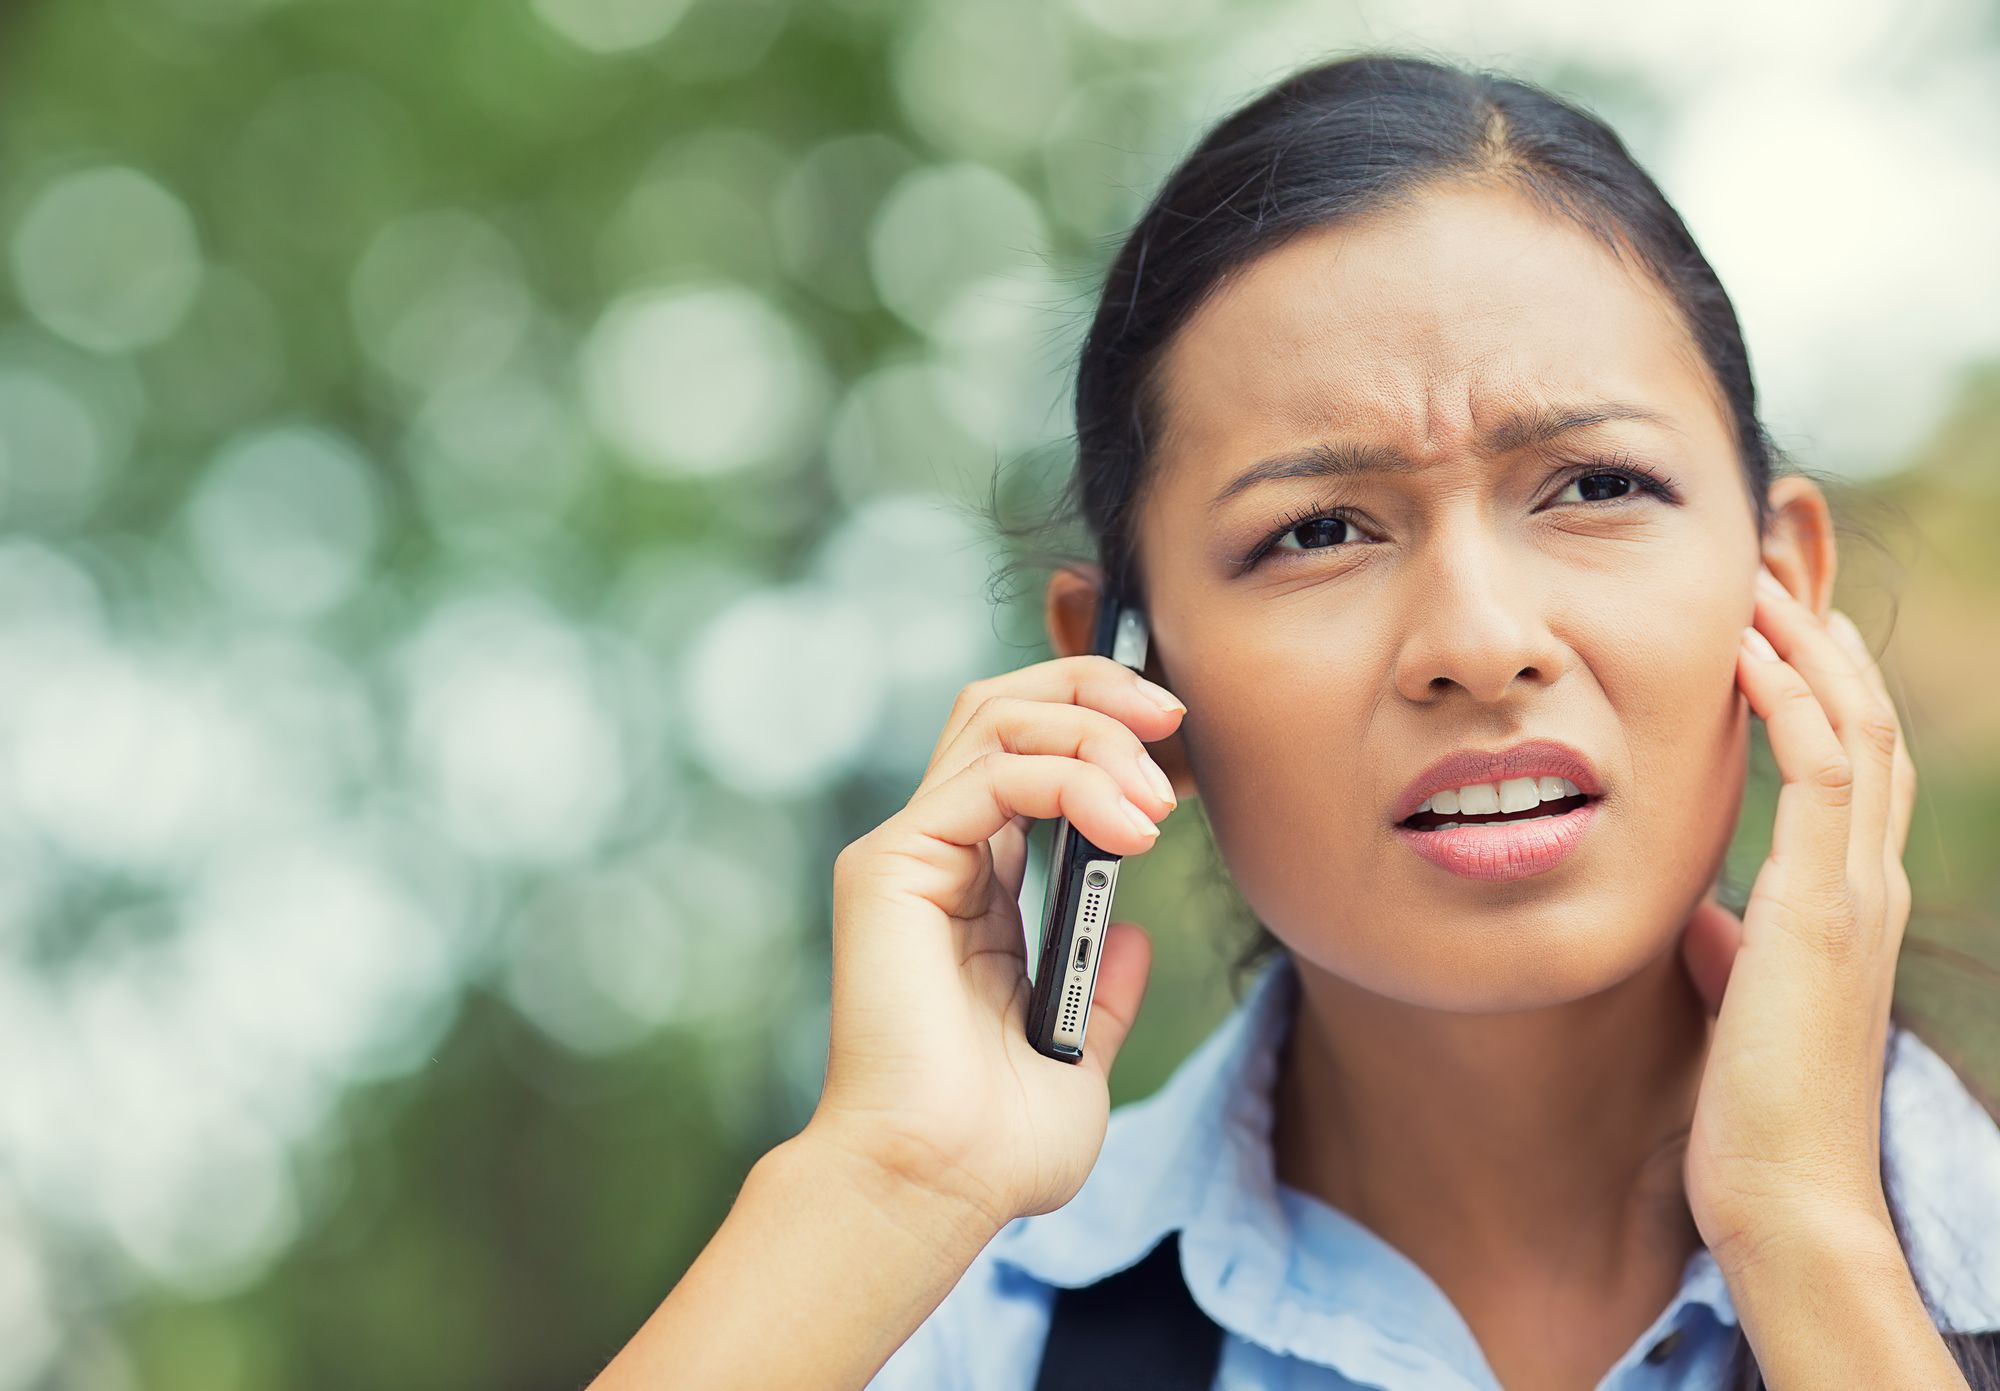 Closeup portrait, headshot Frustrated young businesswoman in formalwear talking on mobile phone, touching face, closing ear with hand while standing outdoors, bad news, cellular connection concept